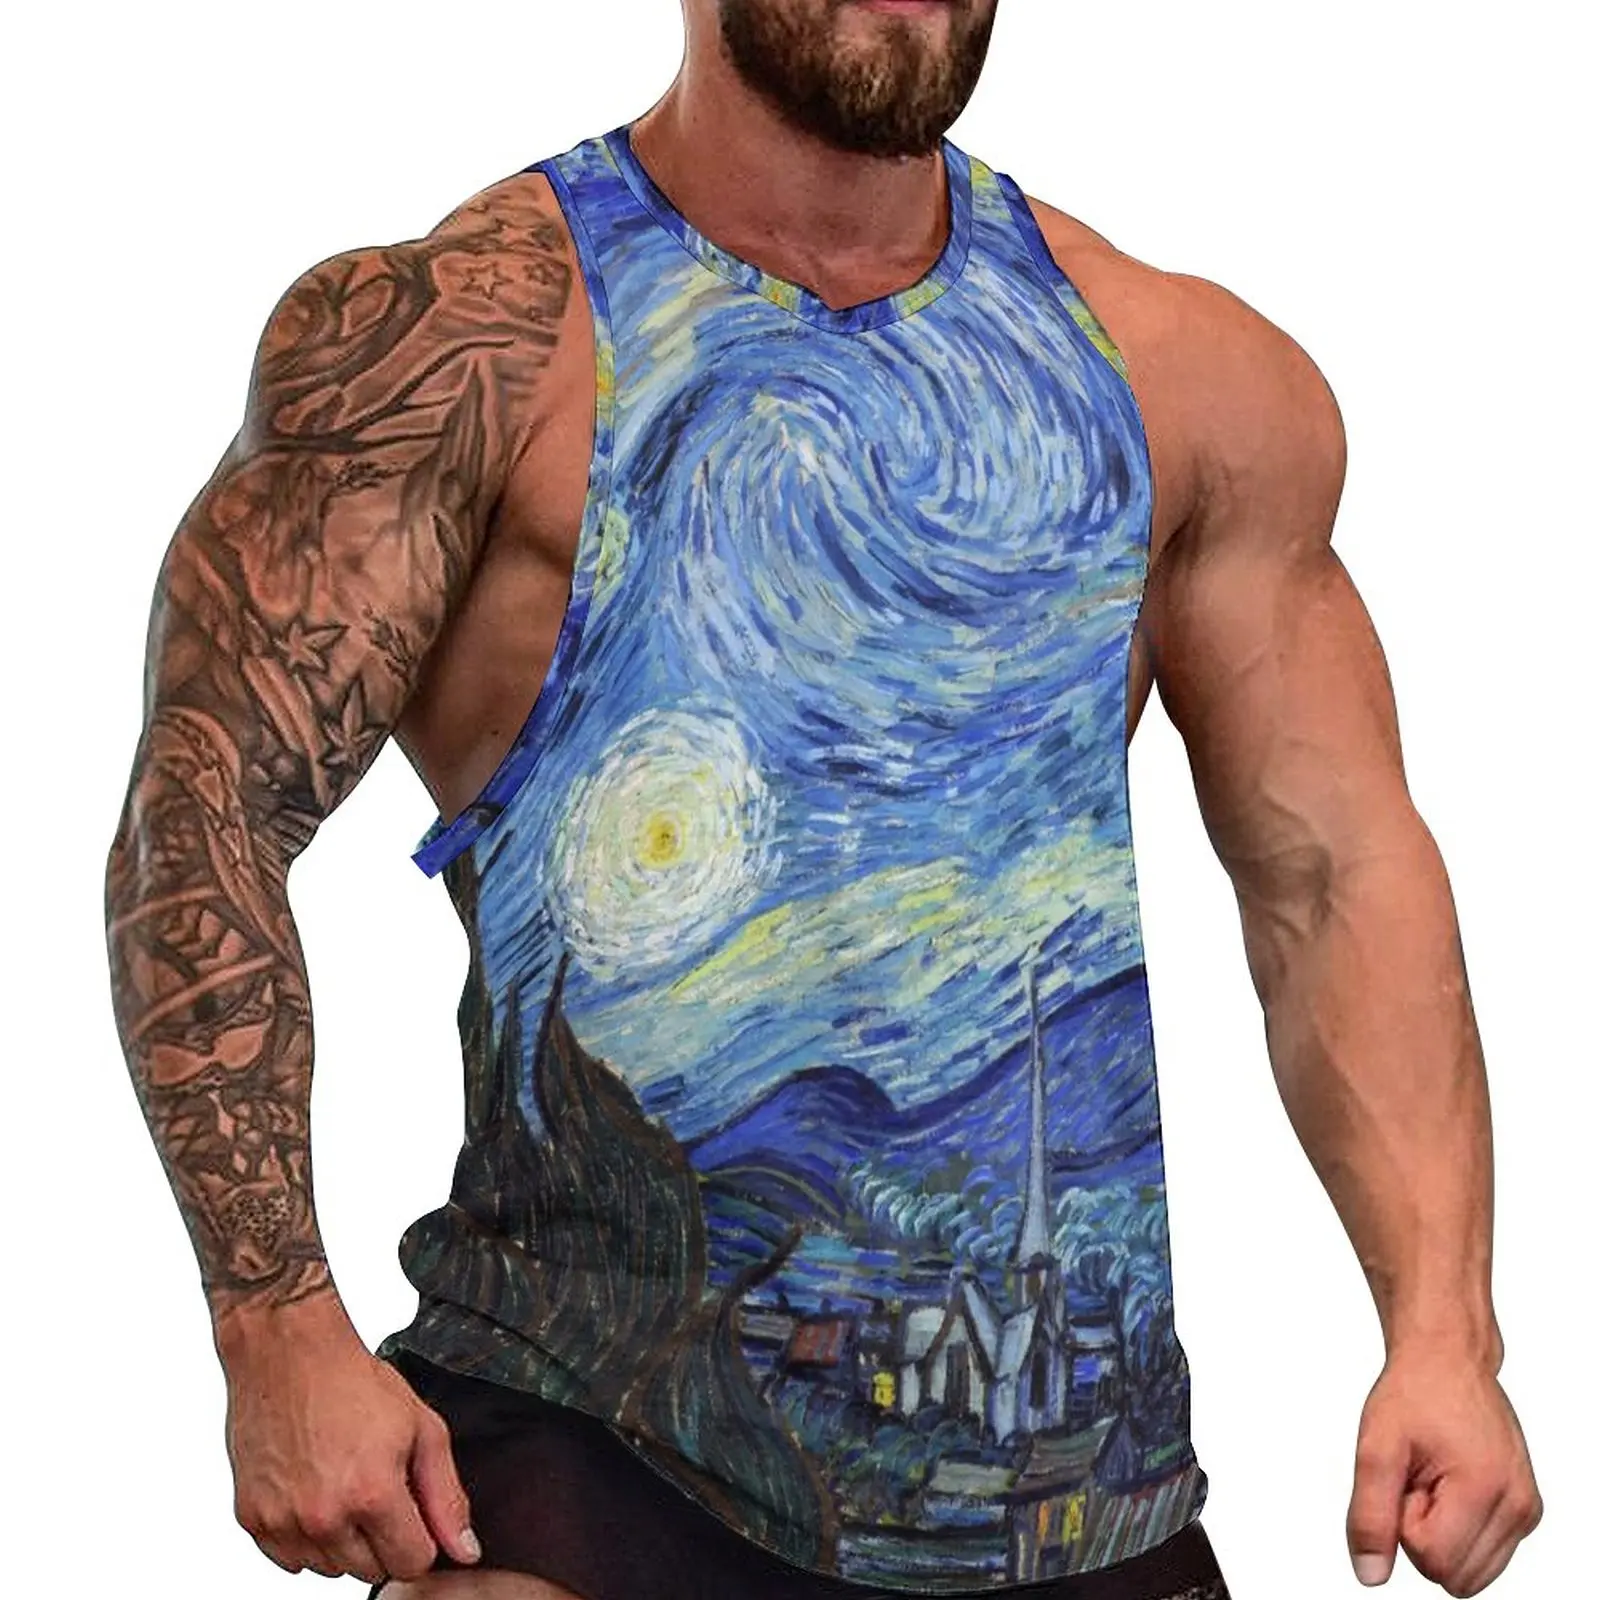 

The Starry Night Tank Top Man's Vincent Van Gogh Training Oversize Tops Beach Vintage Printed Sleeveless Vests